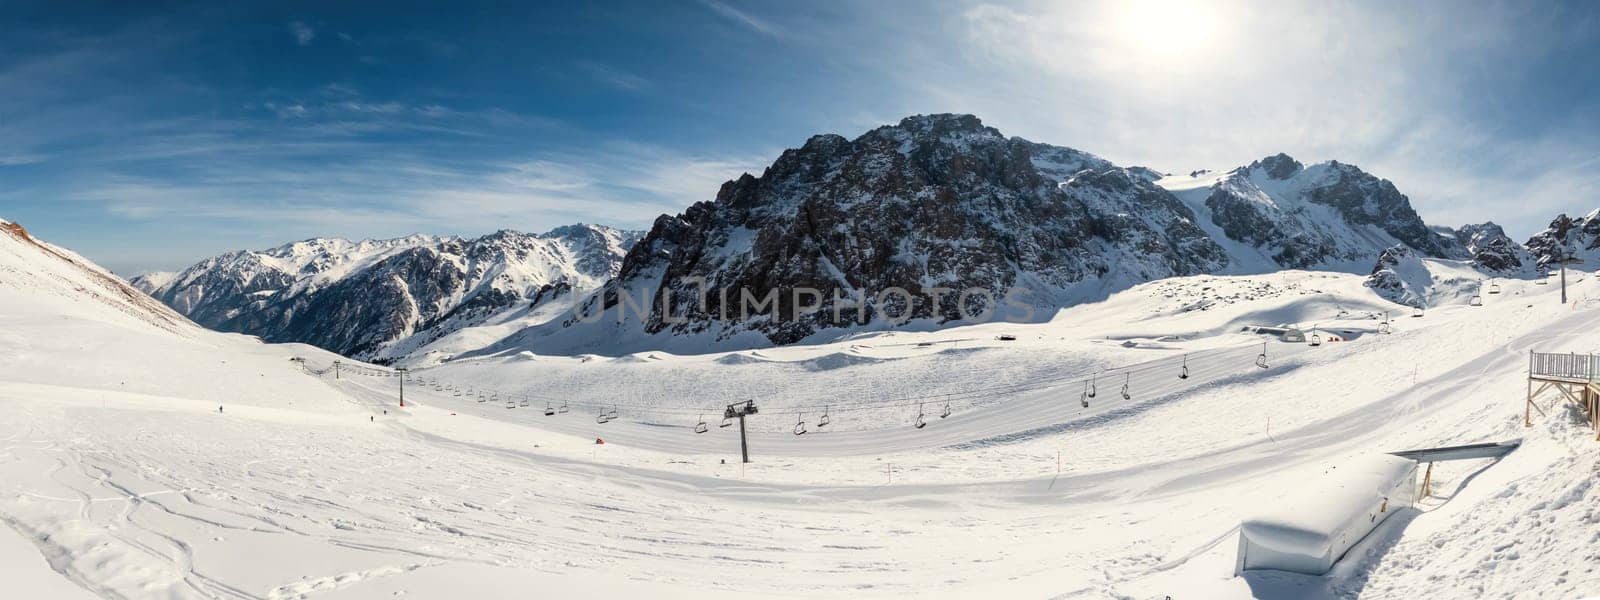 Panorama of ski lift chairs against a backdrop of sunlit mountains on a crisp winter day at high altitude.